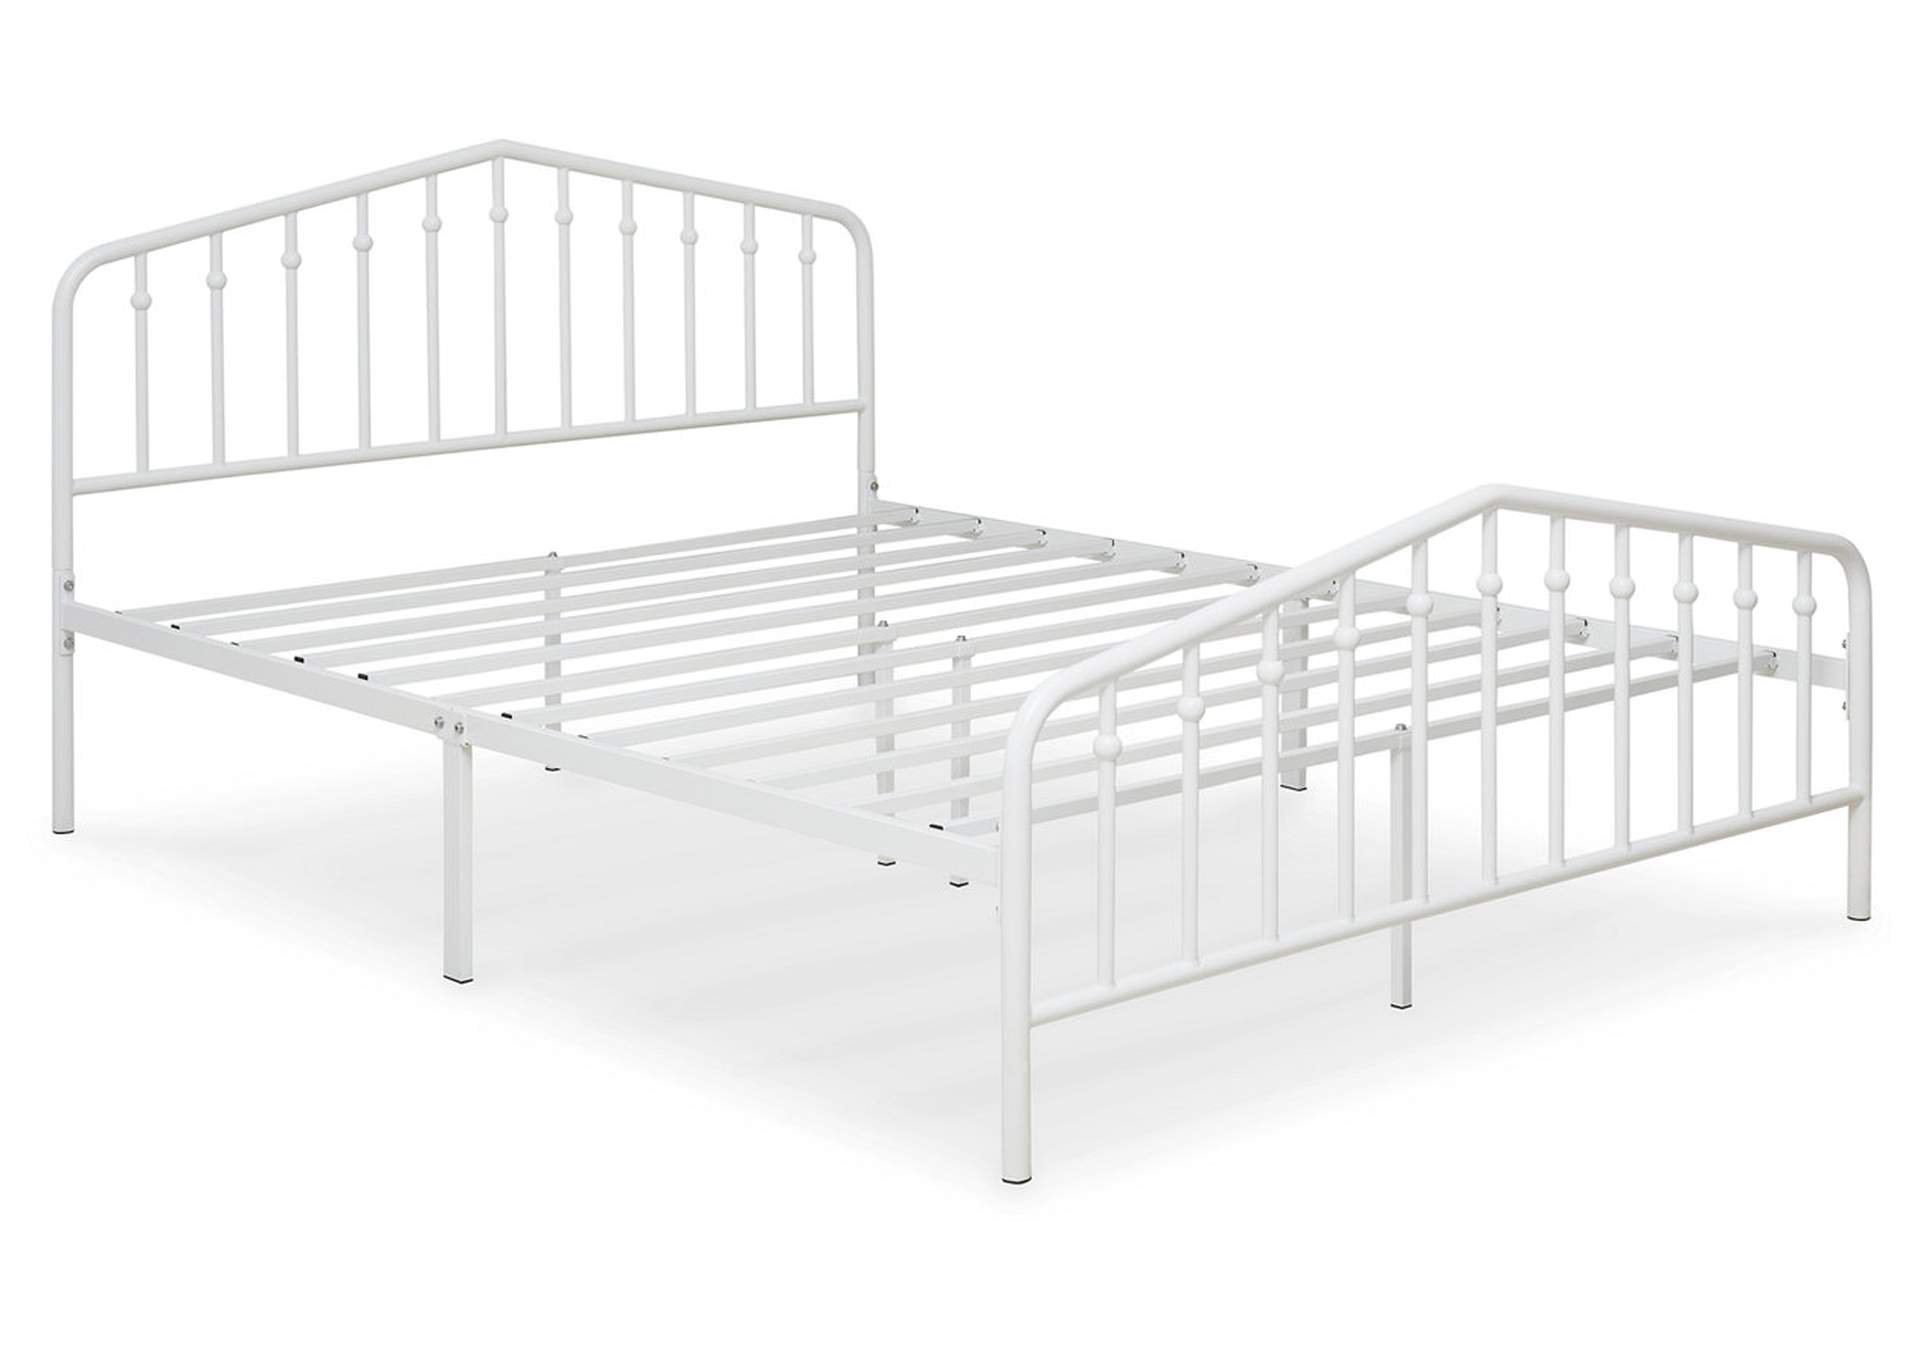 Trentlore Queen Metal Bed,Signature Design By Ashley